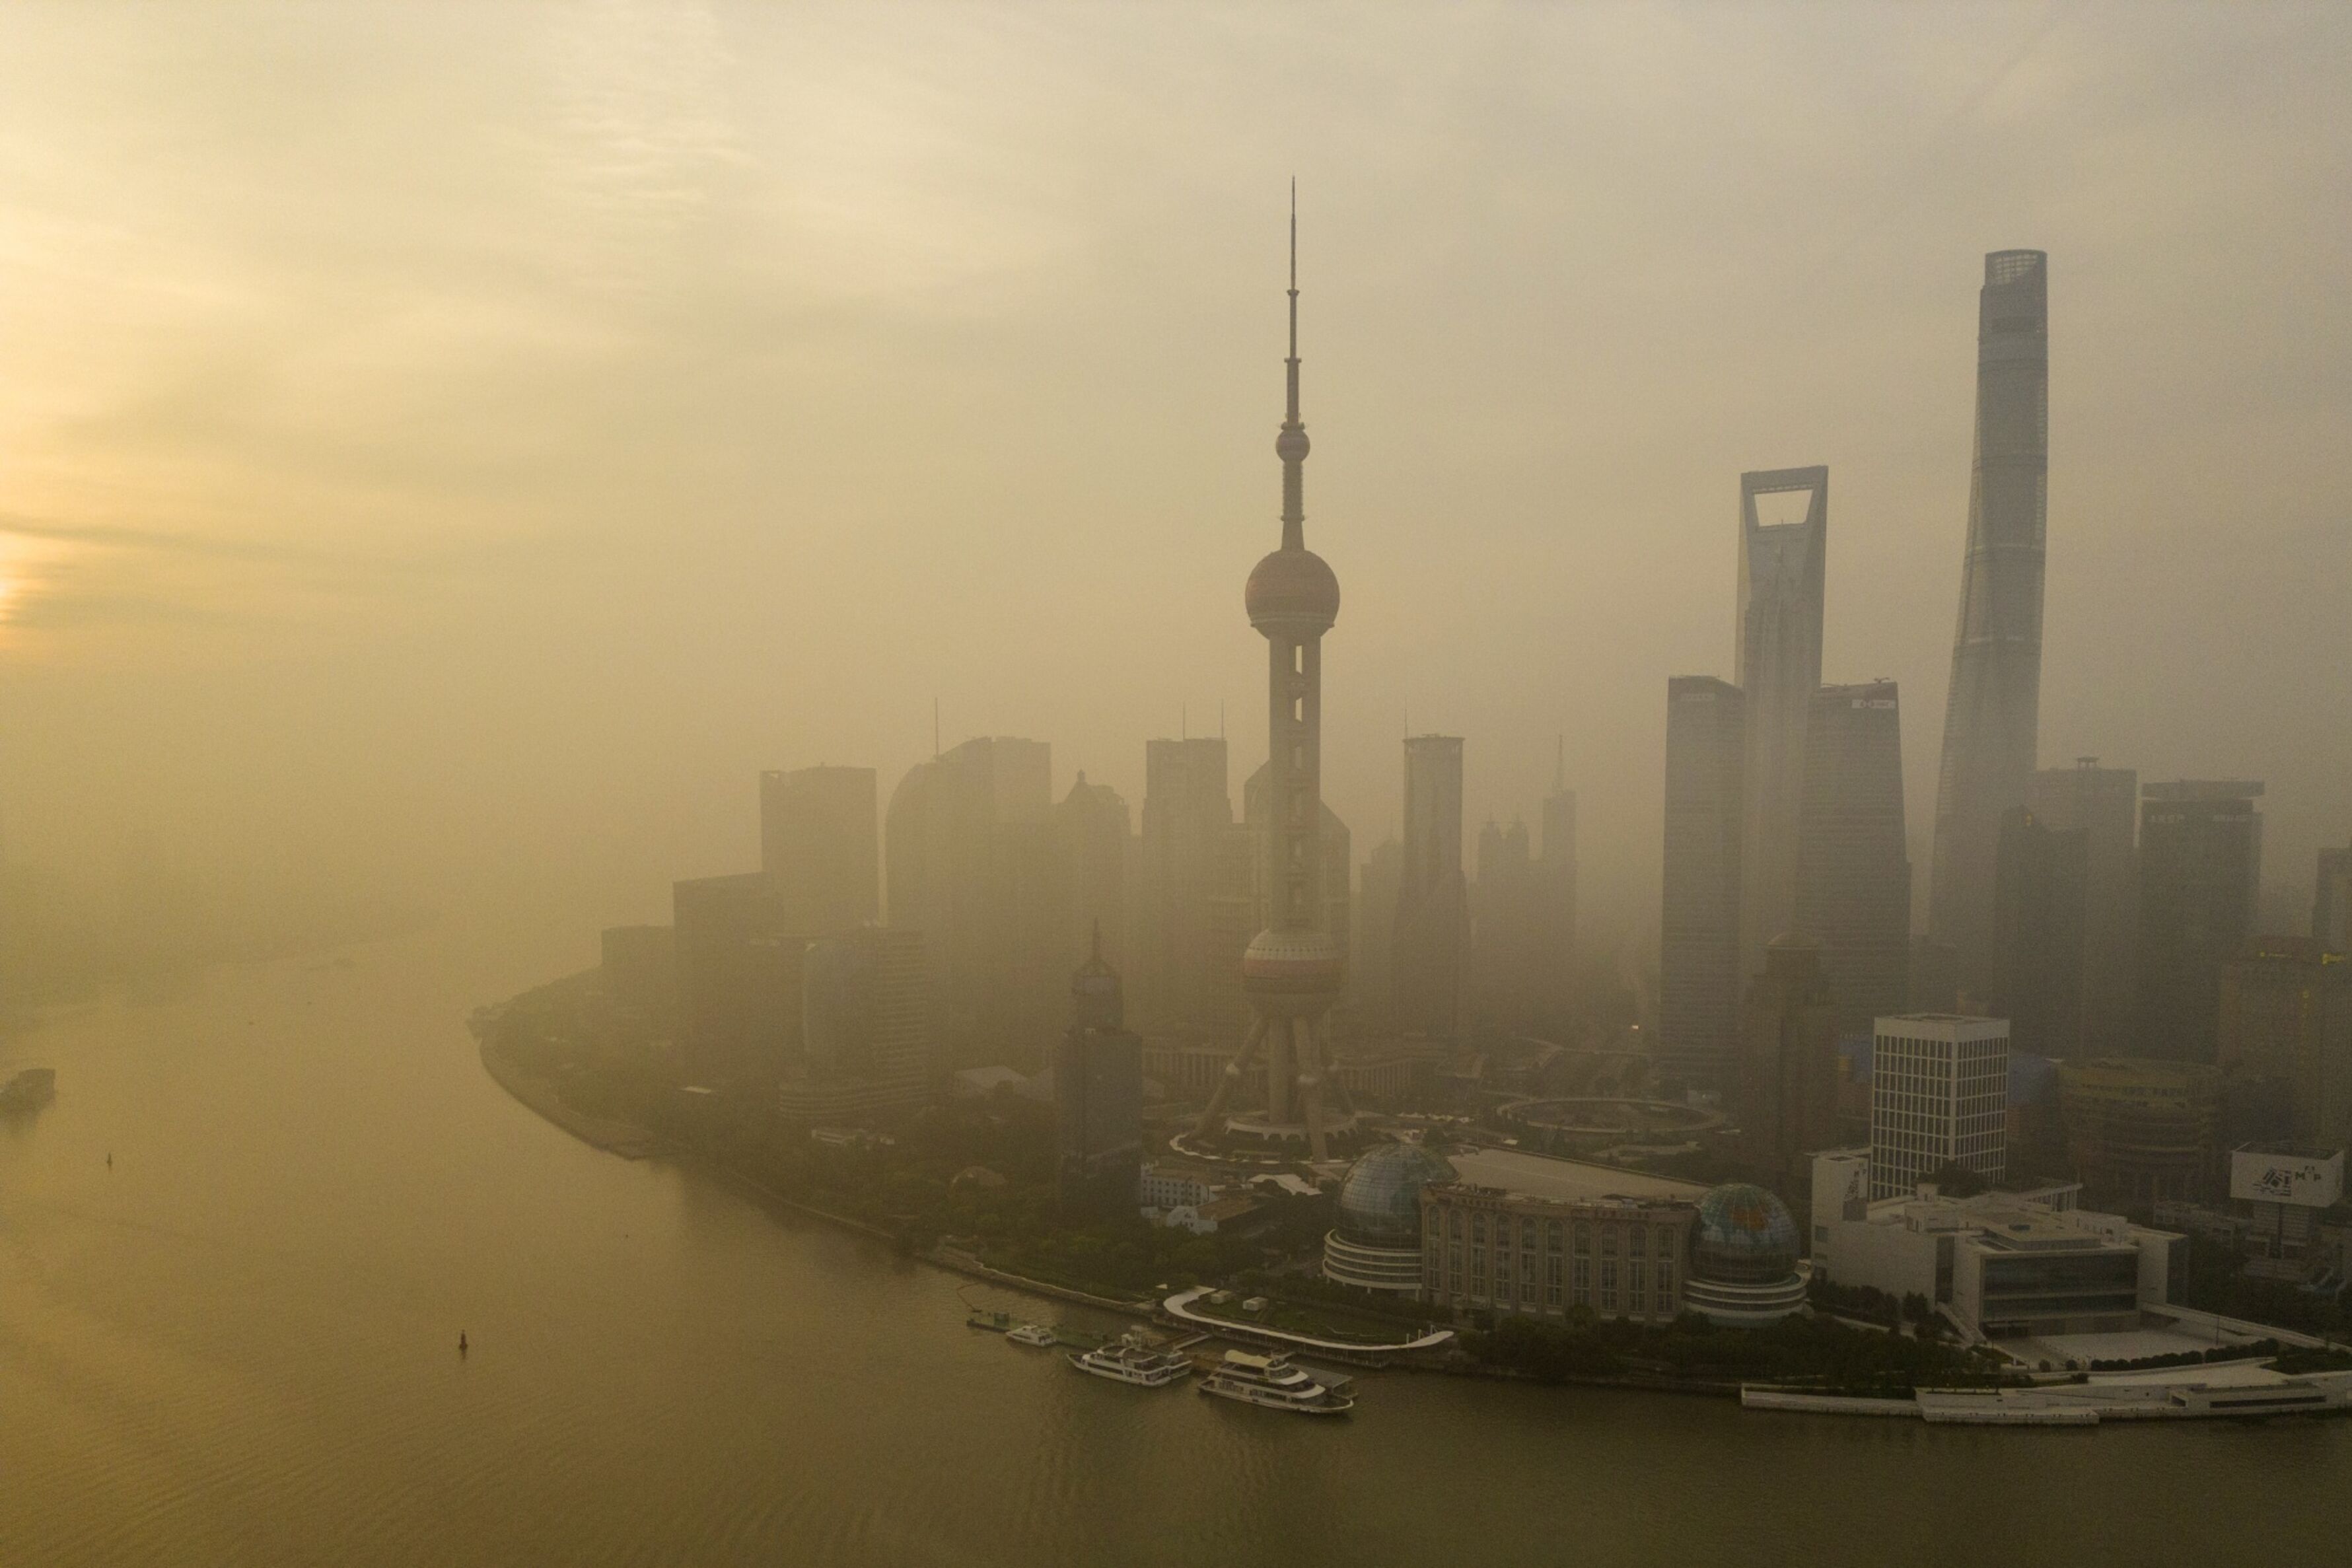 Shanghai’s Lujiazui Financial District on June 21. Photo: Bloomberg